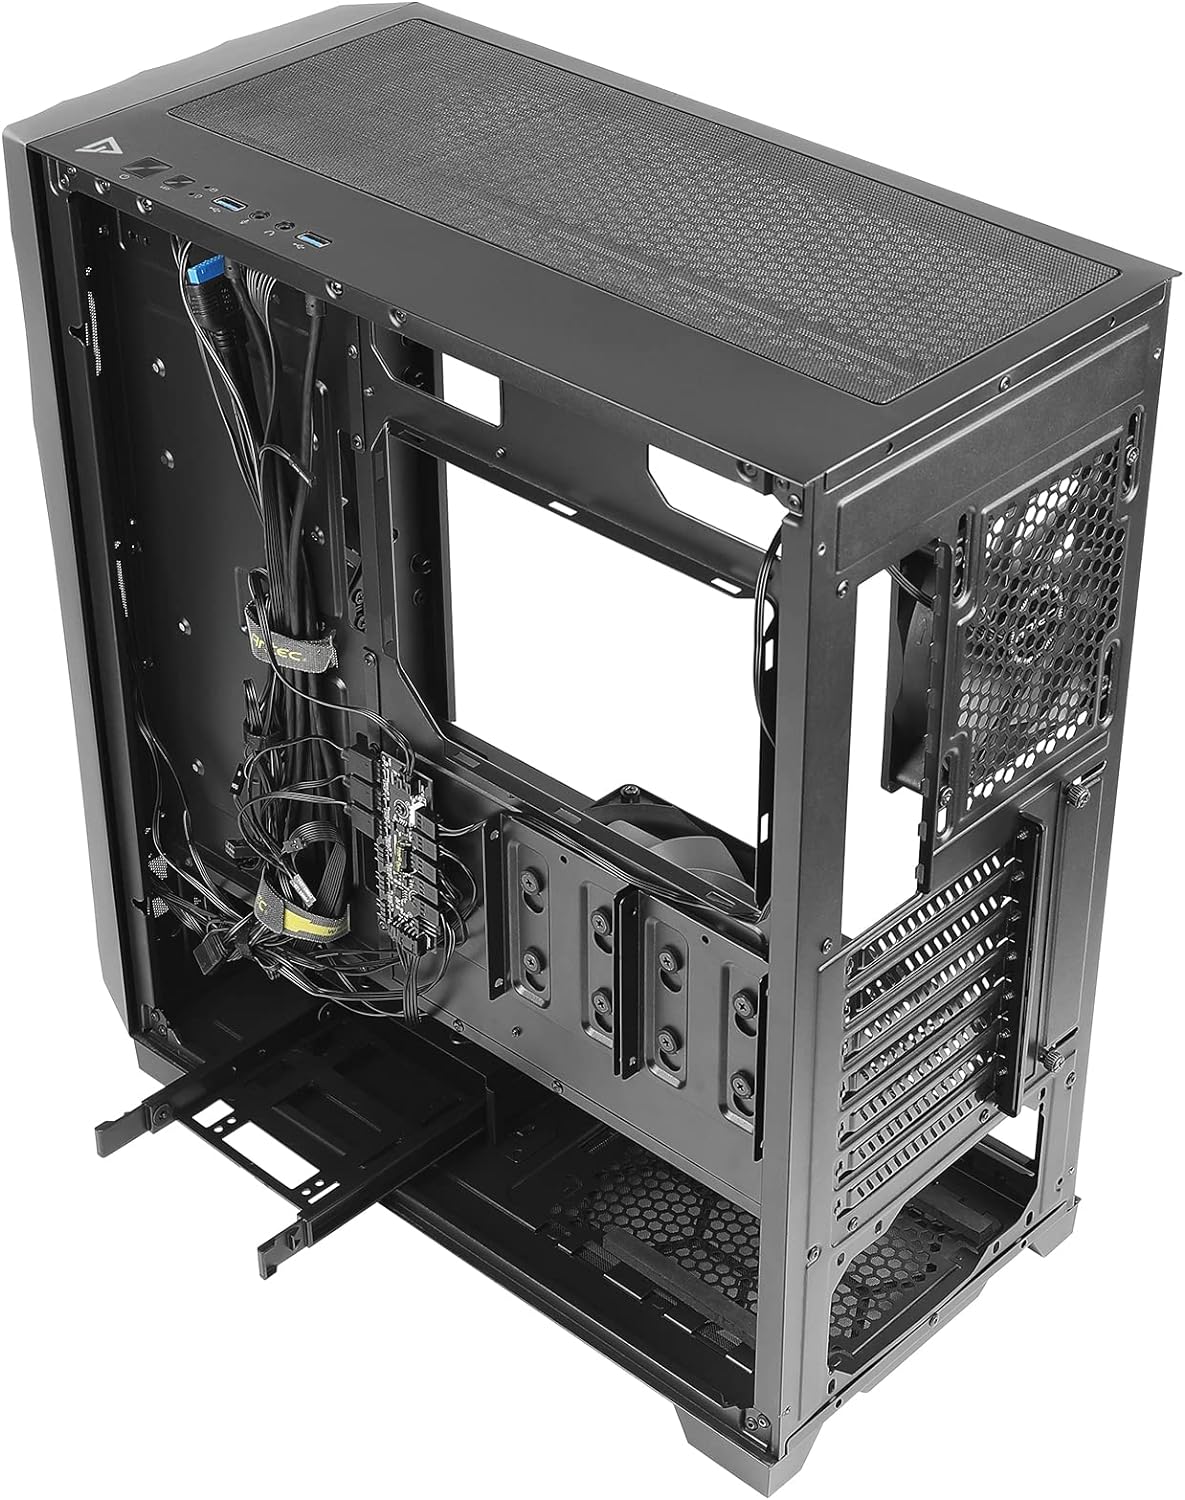 Antec DF700 Flux, Mid Tower Computer Case, ATX Gaming Case, USB3.0 x 2, 360 mm Radiator Support, 3 x 120 mm ARGB, 1 x 120 mm Reverse  1 x 120 mm Fans Included